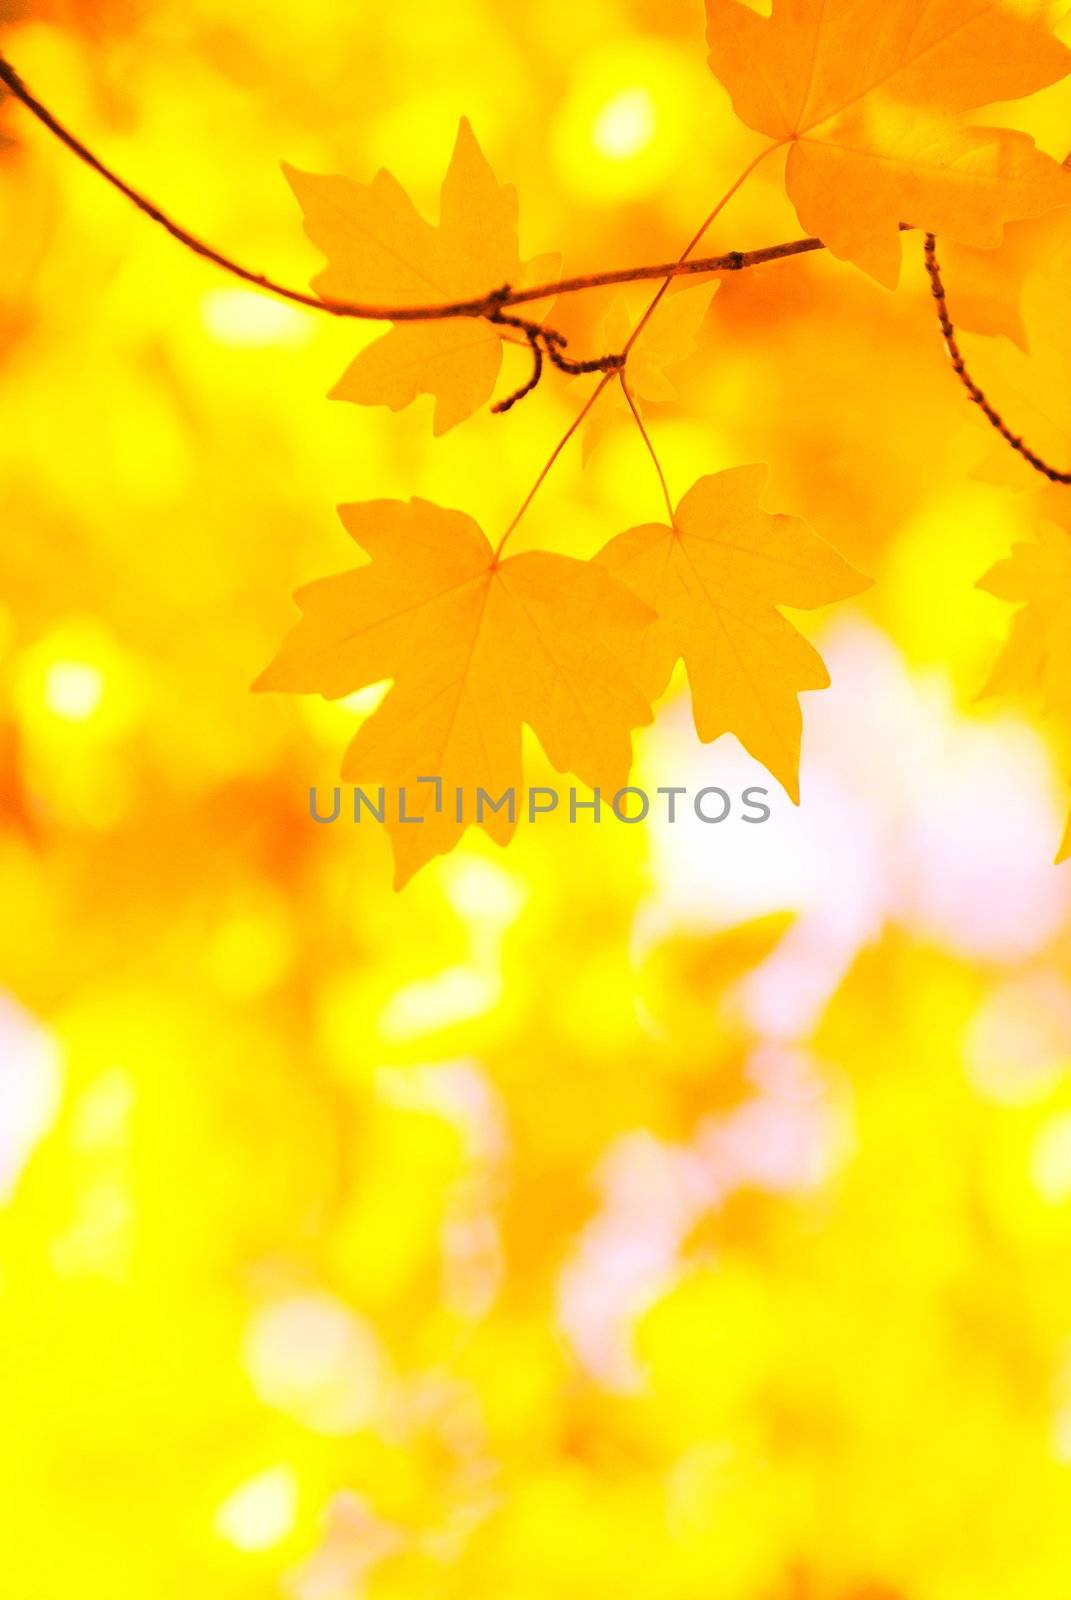 autumn leaves background in sunny day